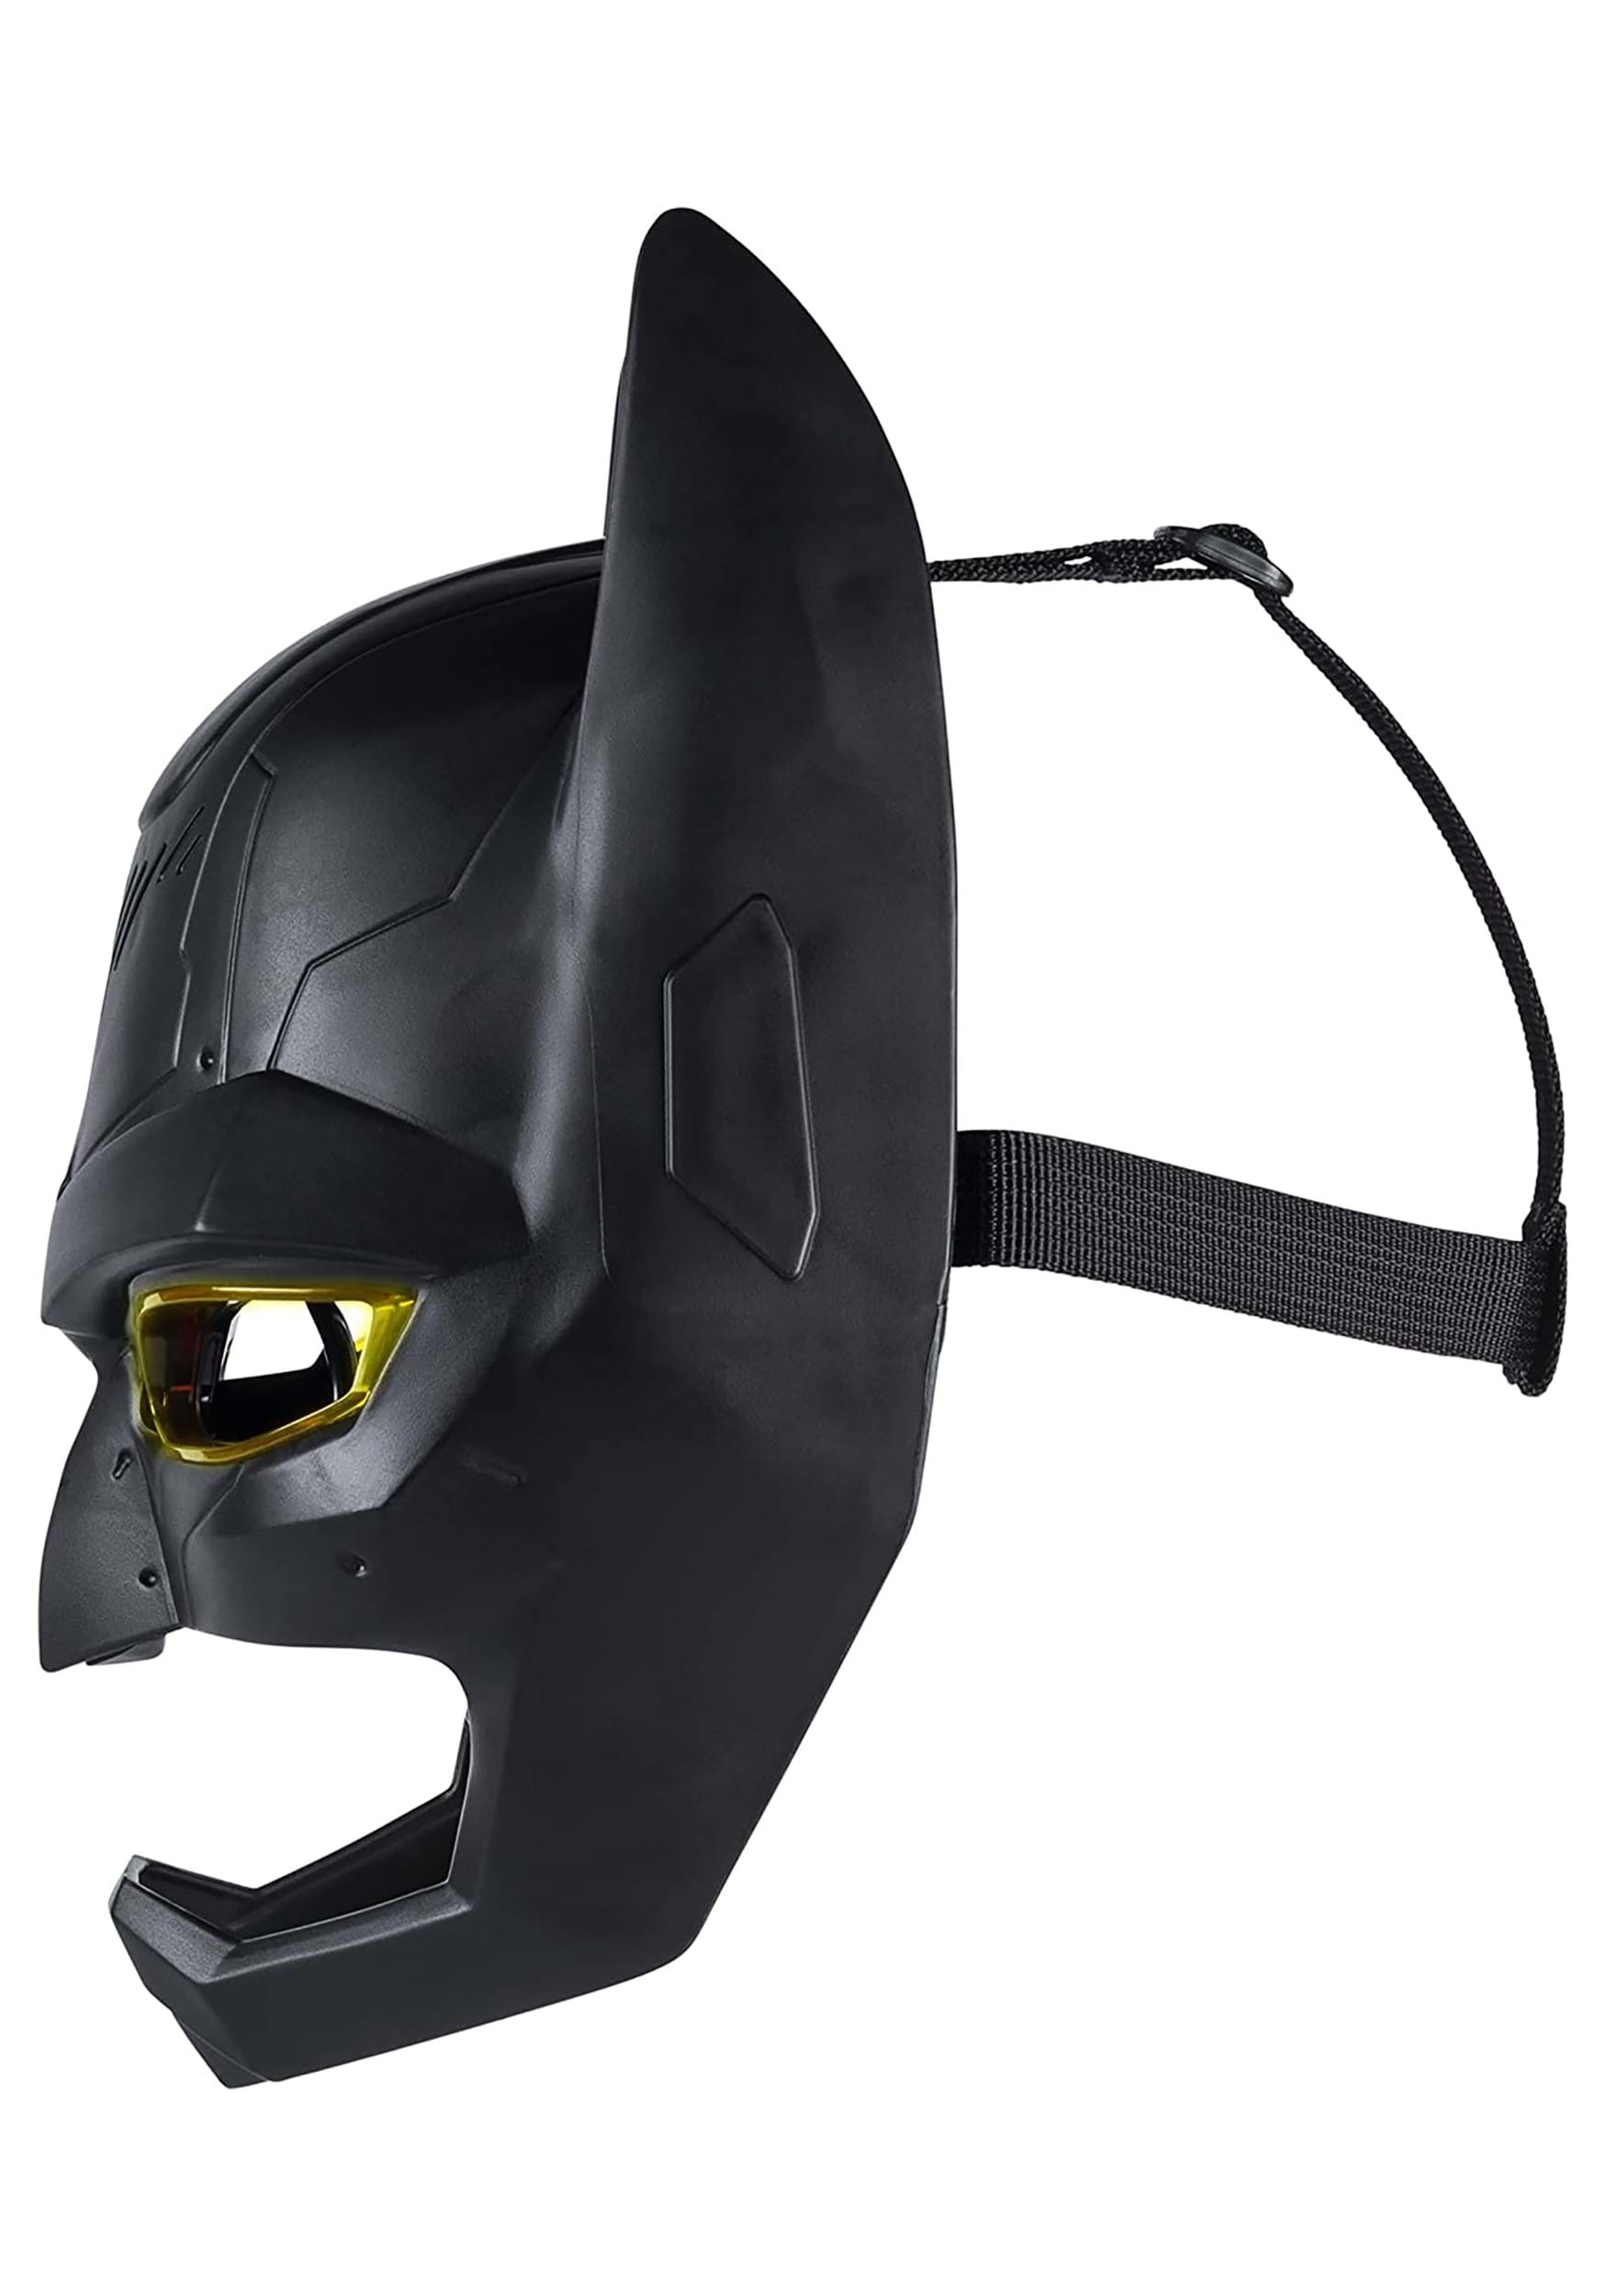 DC Batman Voice Changing Mask with Sounds